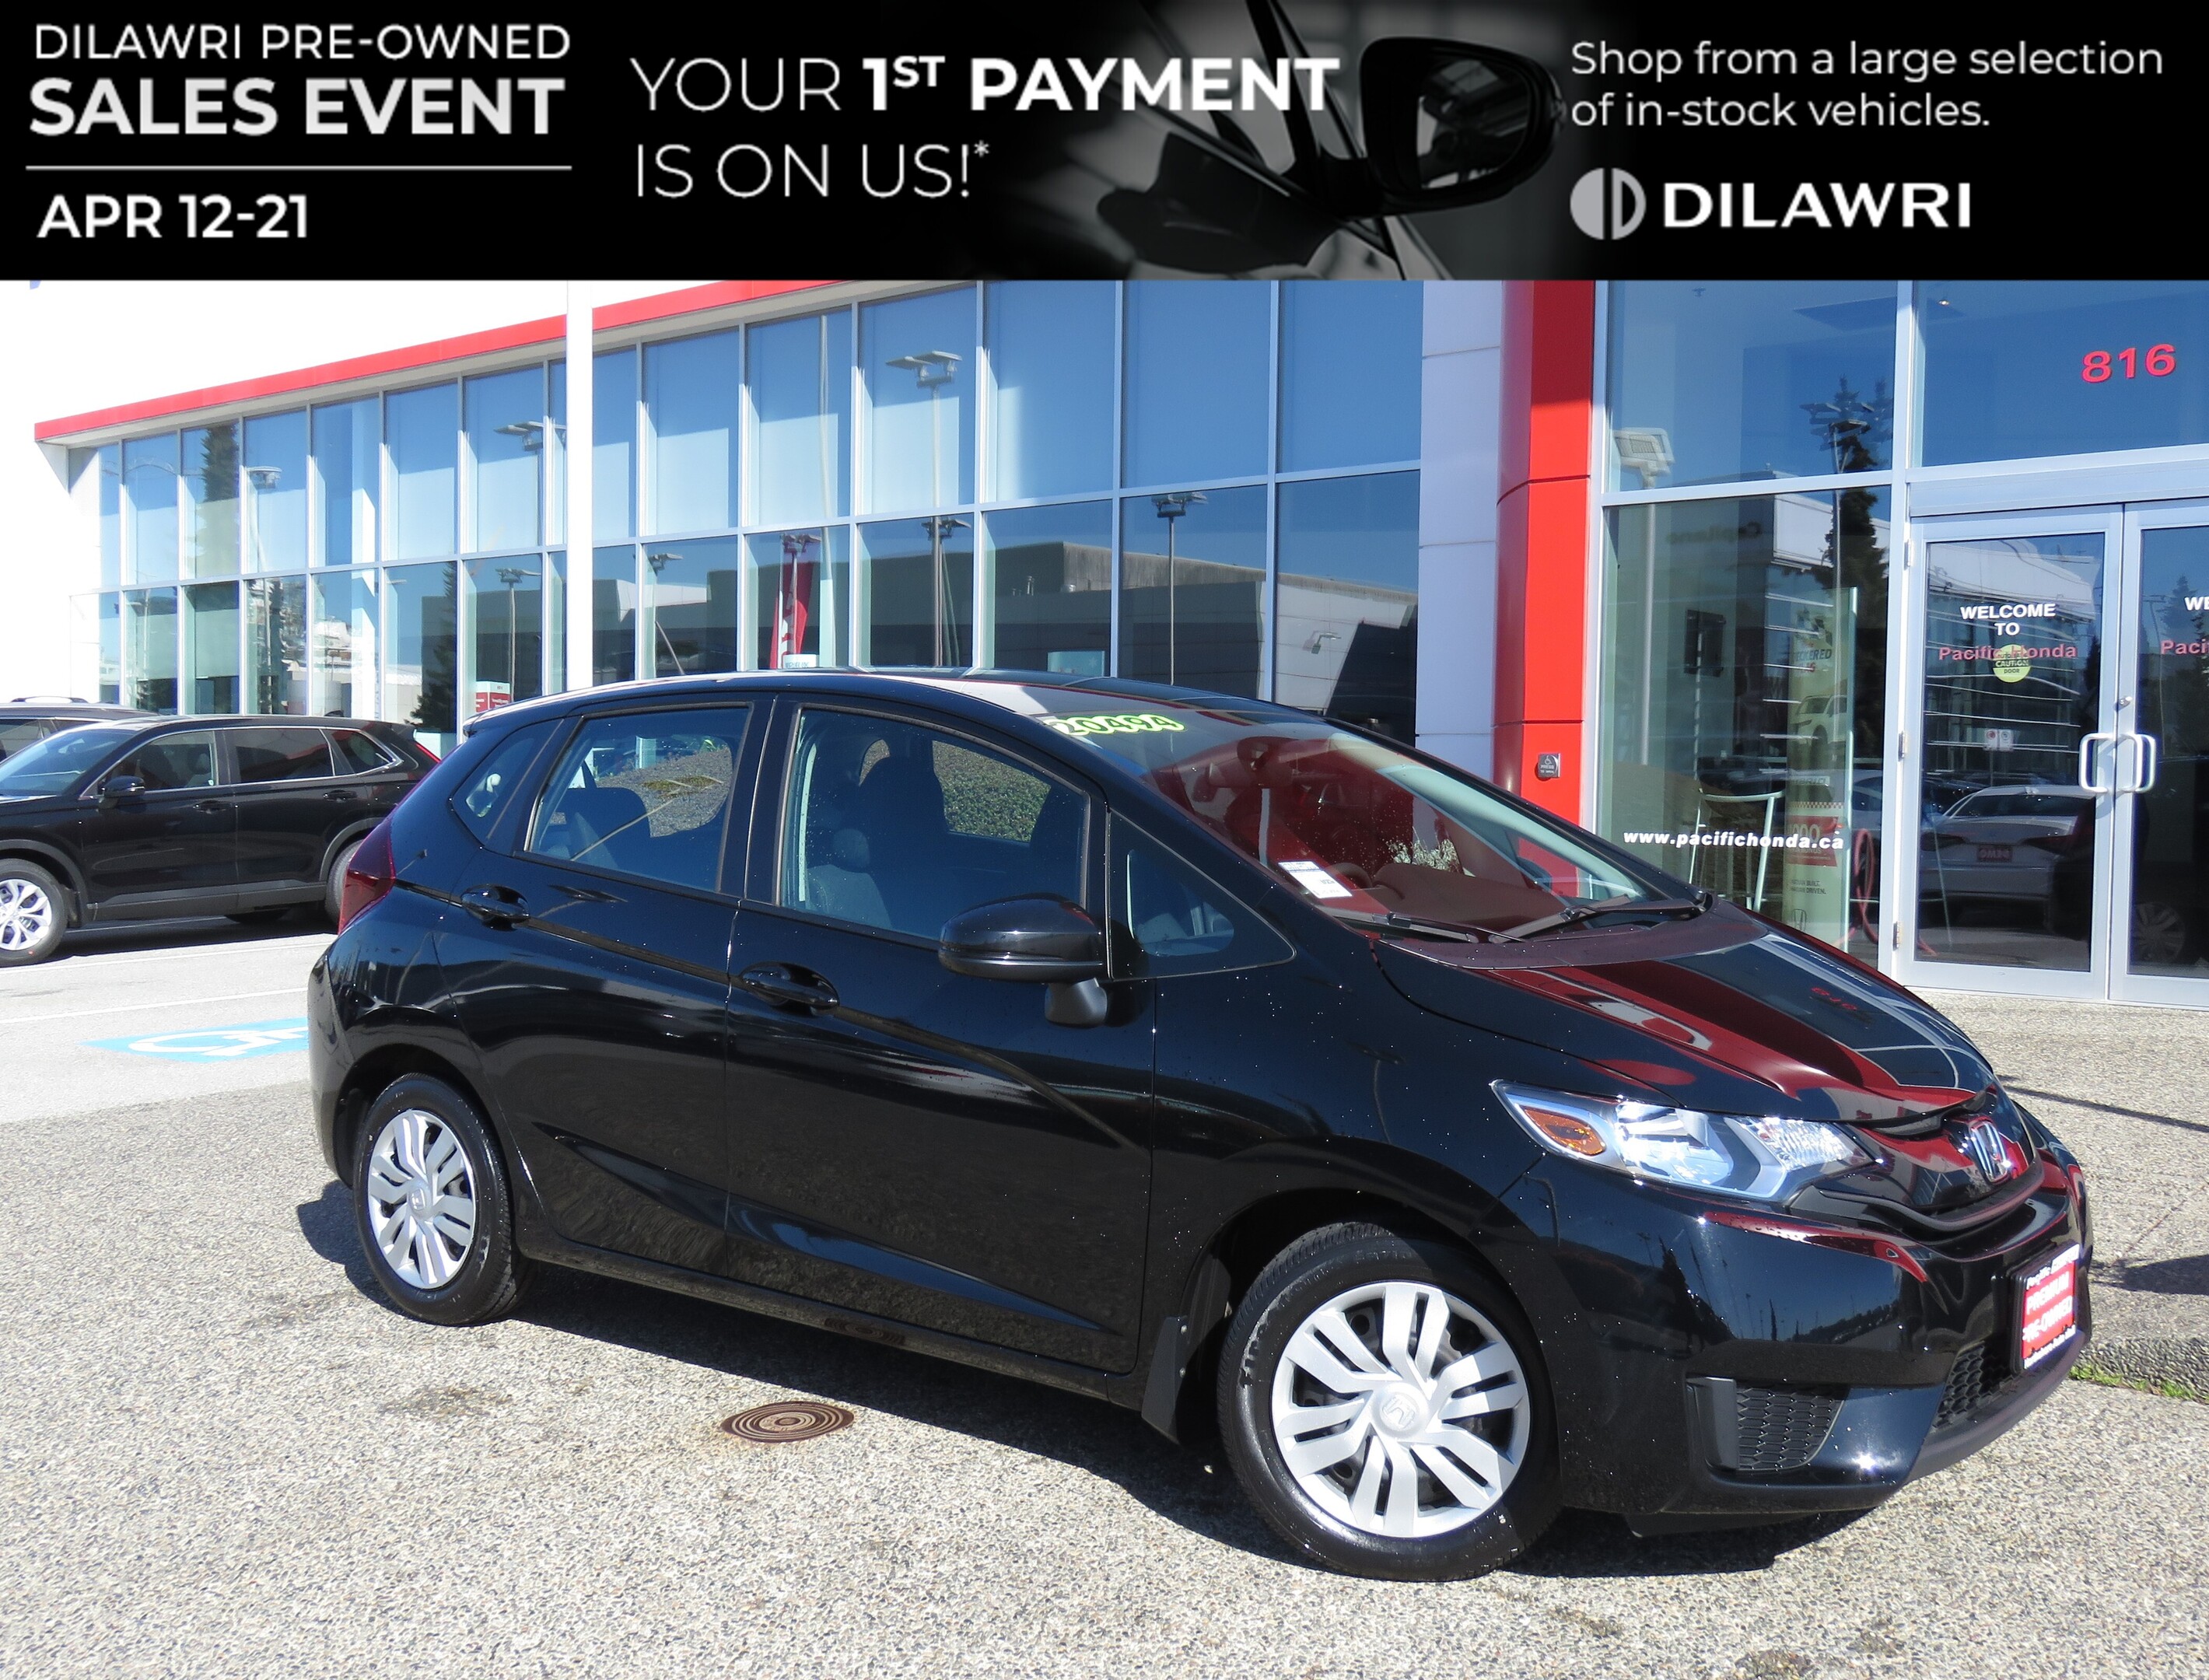 2016 Honda Fit LX Dilawri Pre-owned Event ON Now! |